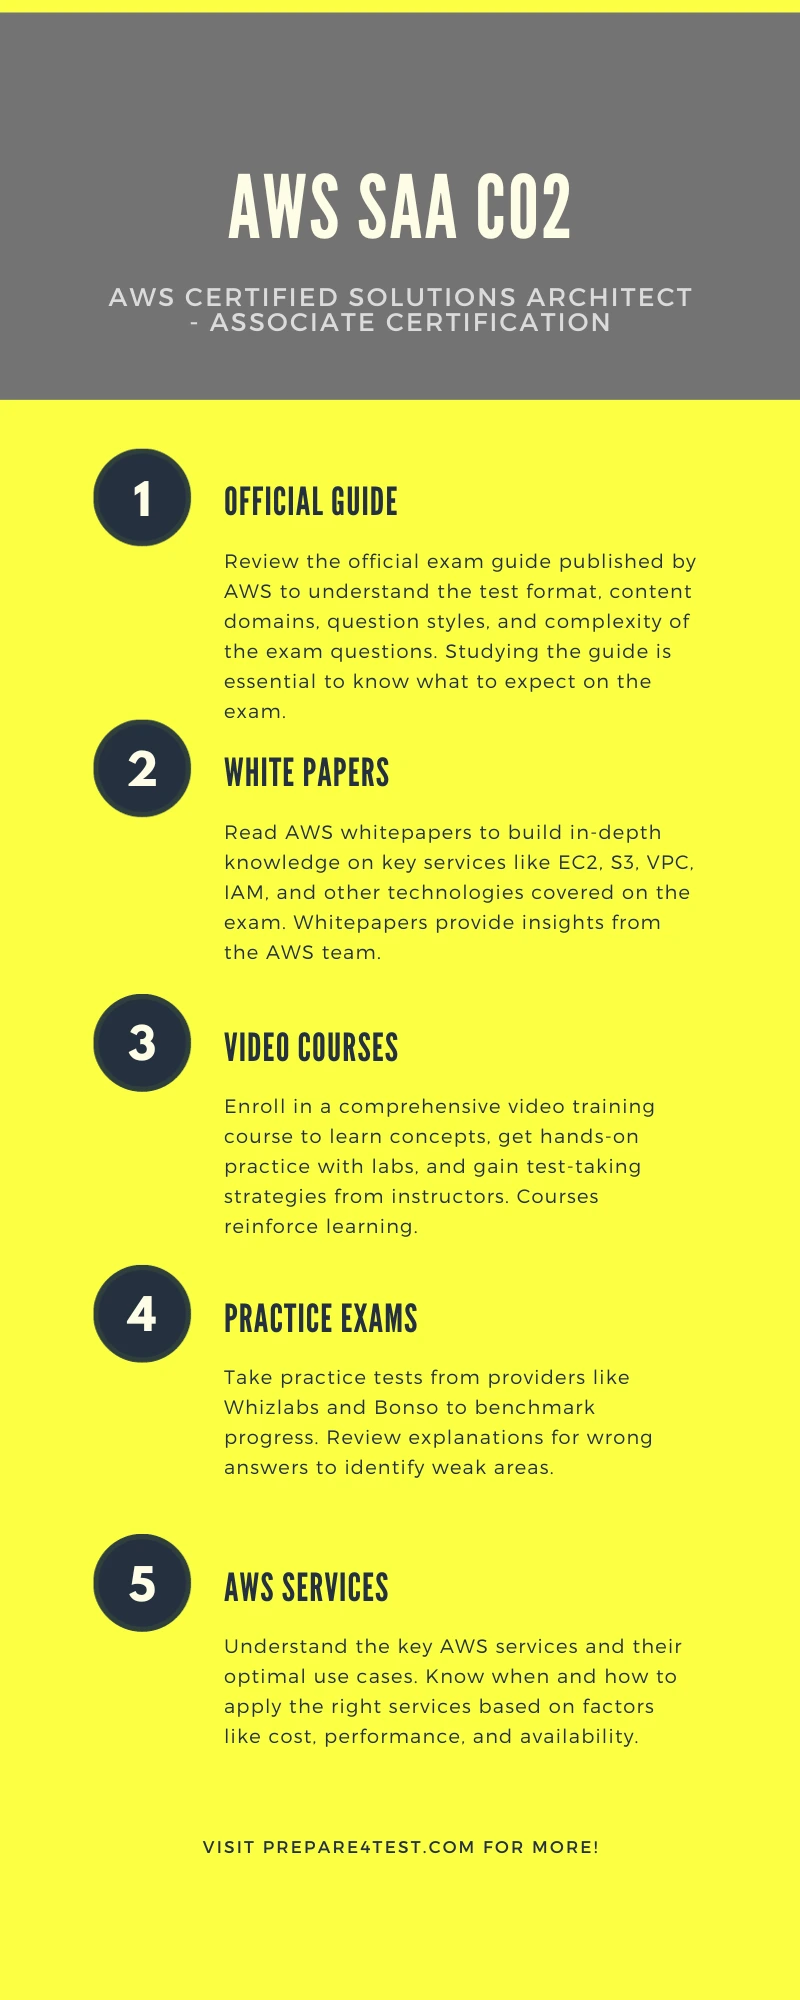 Infograph showing valuable details about AWS SAA C02 exam